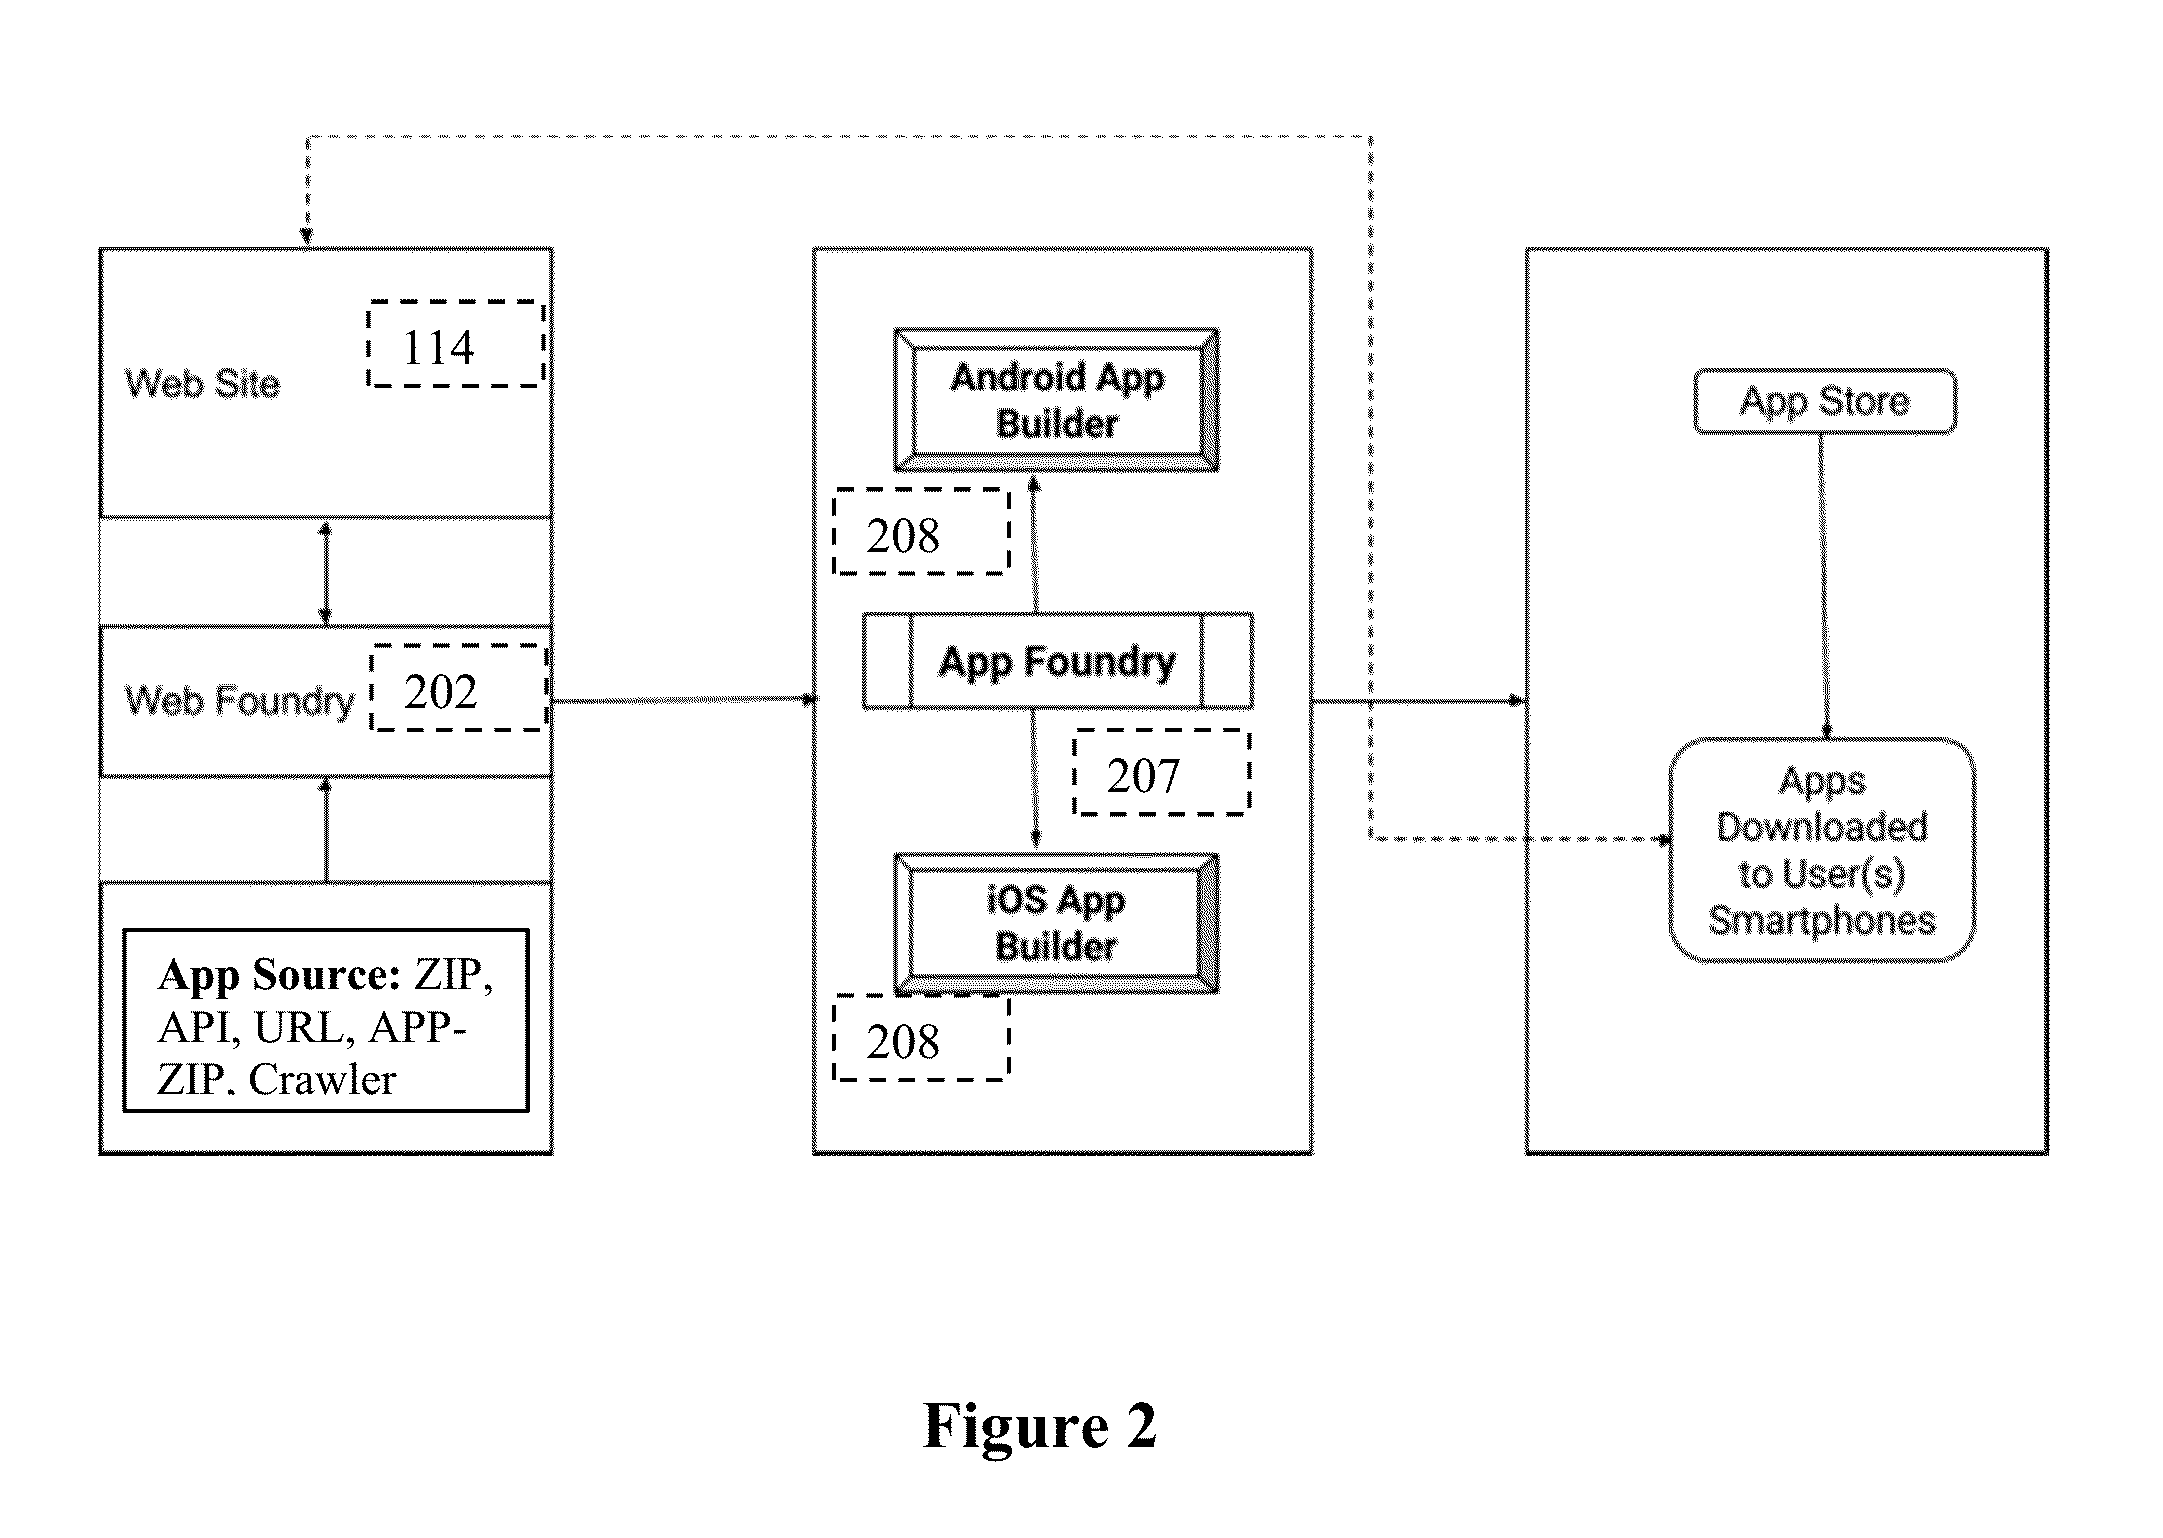 Method and apparatus for converting a website into a native mobile application